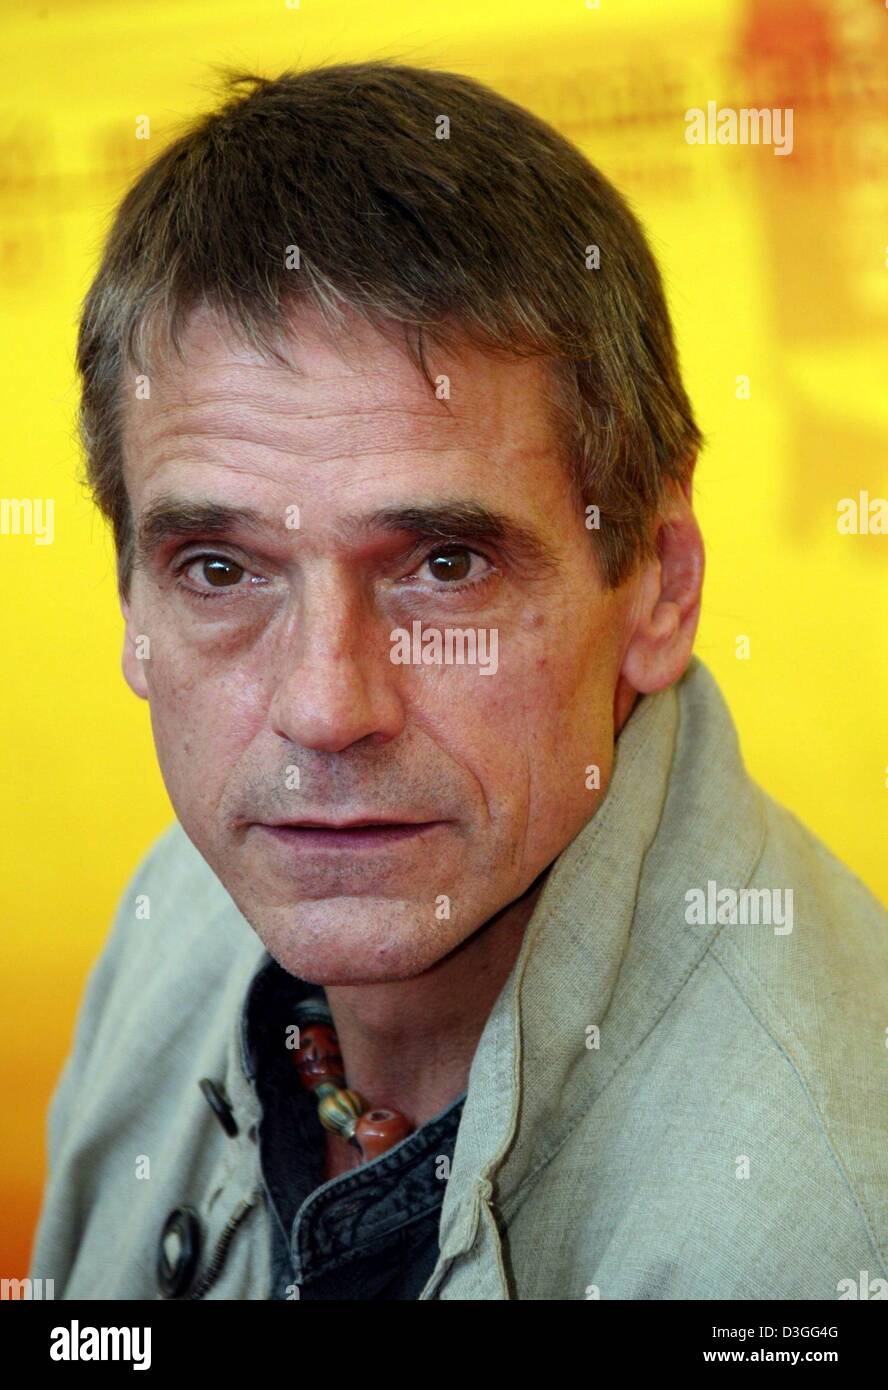 (dpa) - British actor Jeremy Irons pictured during a press conference for his film 'The Merchant of Venice', which runs out of competition at the 61st Venice Film Festival, Italy, 4 September 2004. Stock Photo